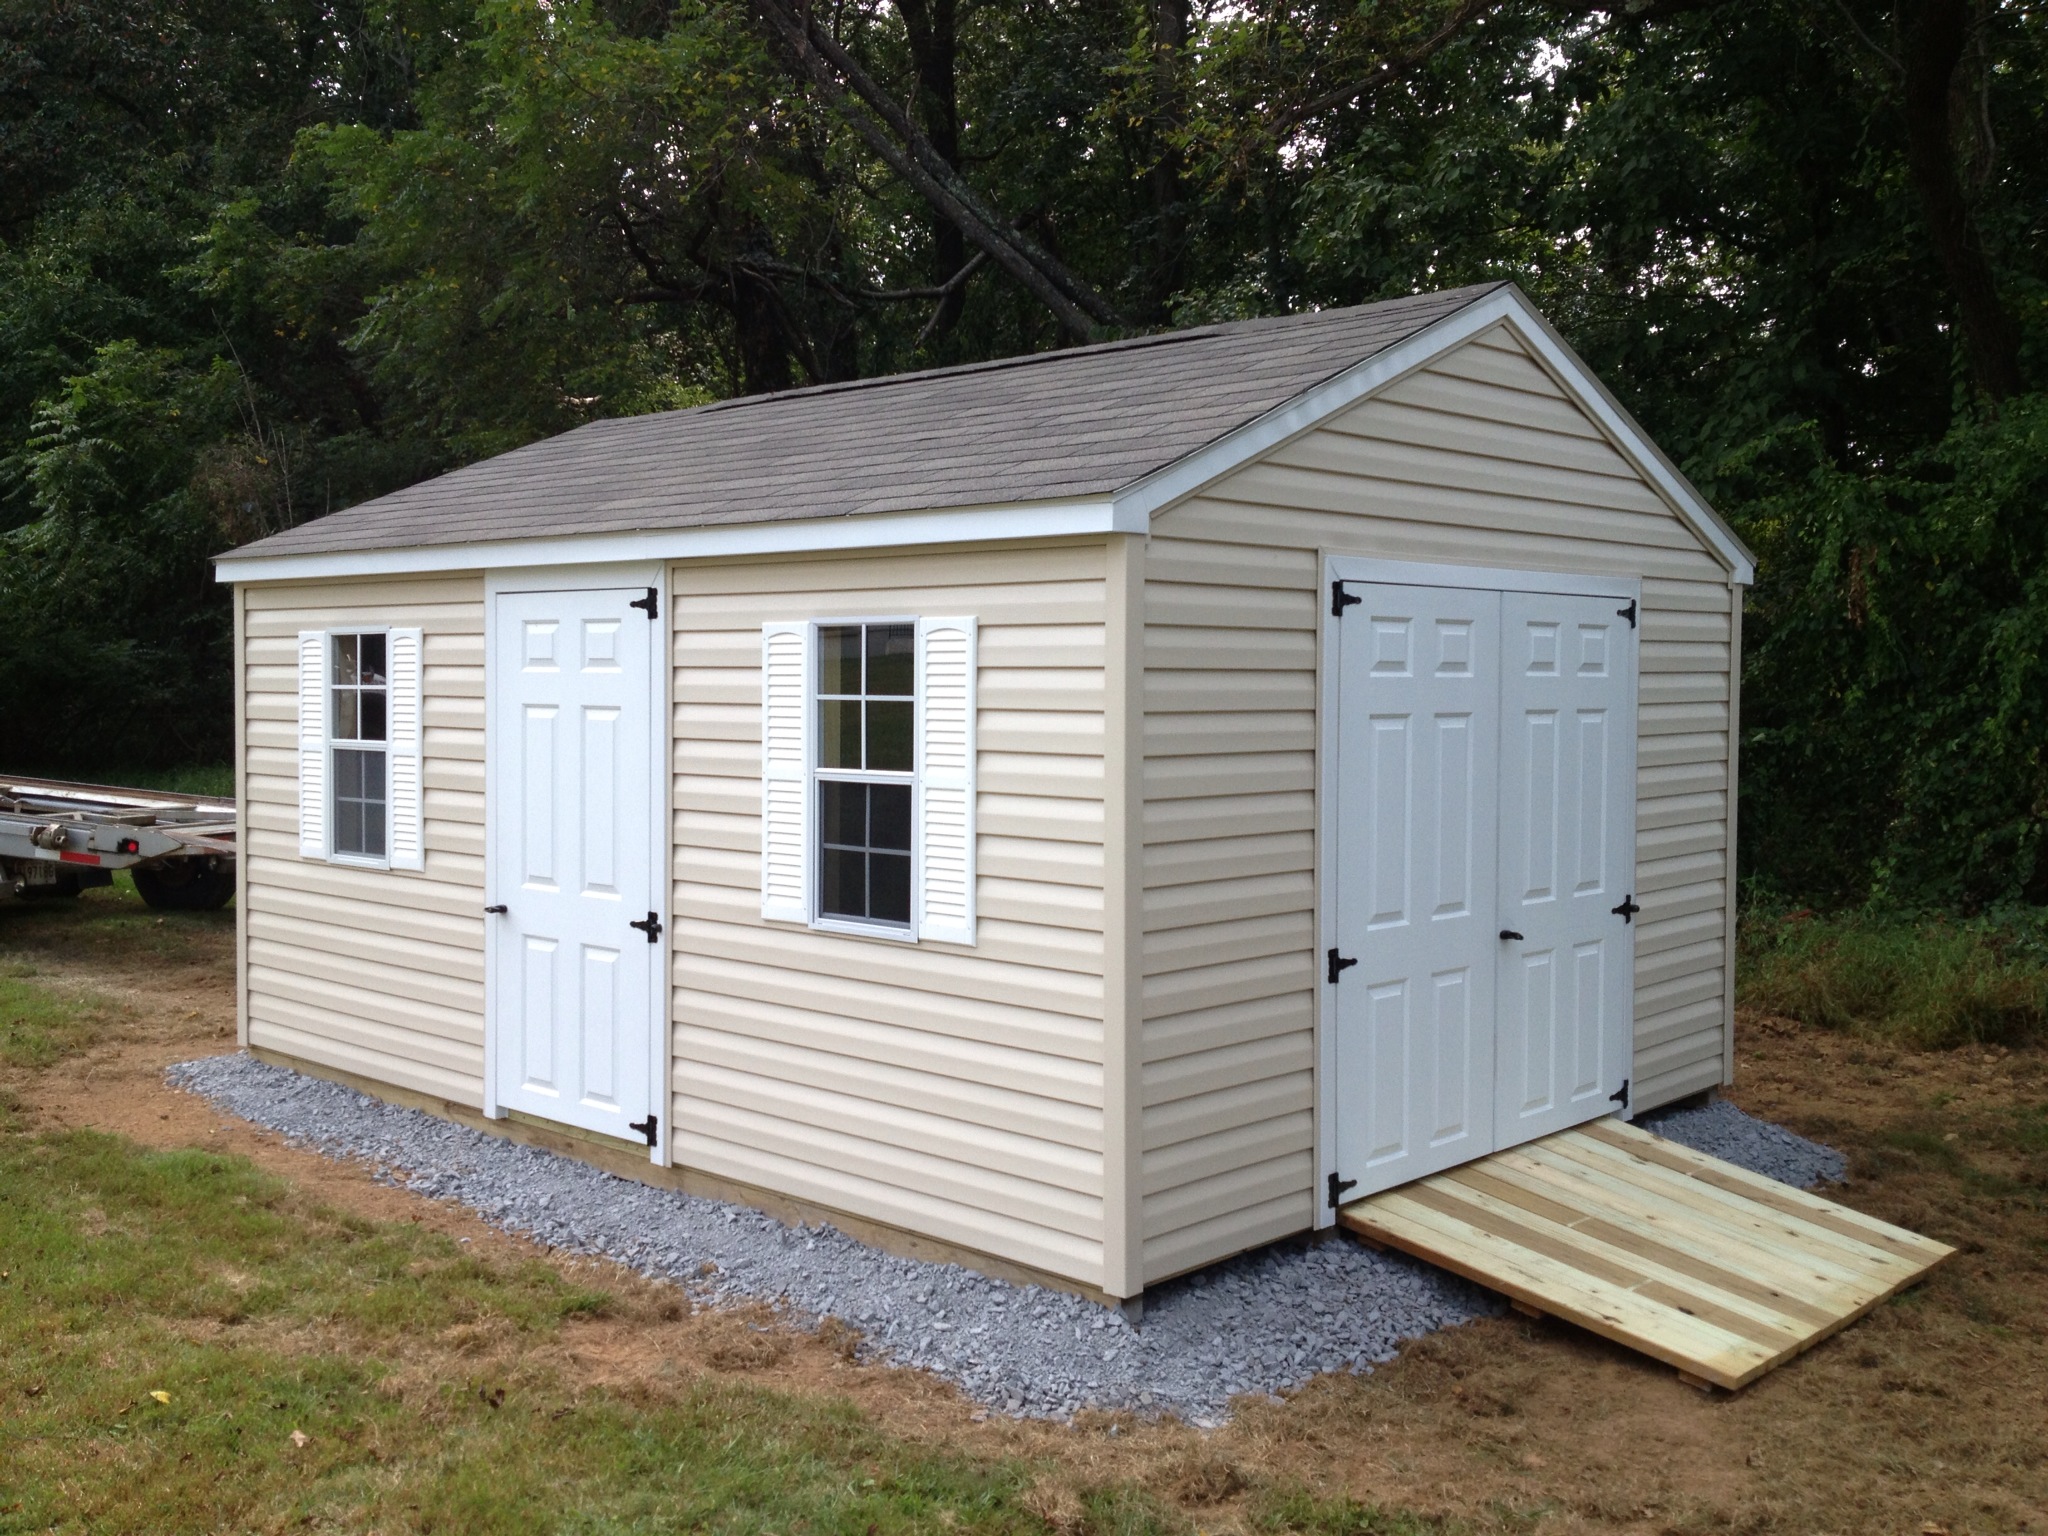 Storage Shed Pad Preparation Pictures to pin on Pinterest